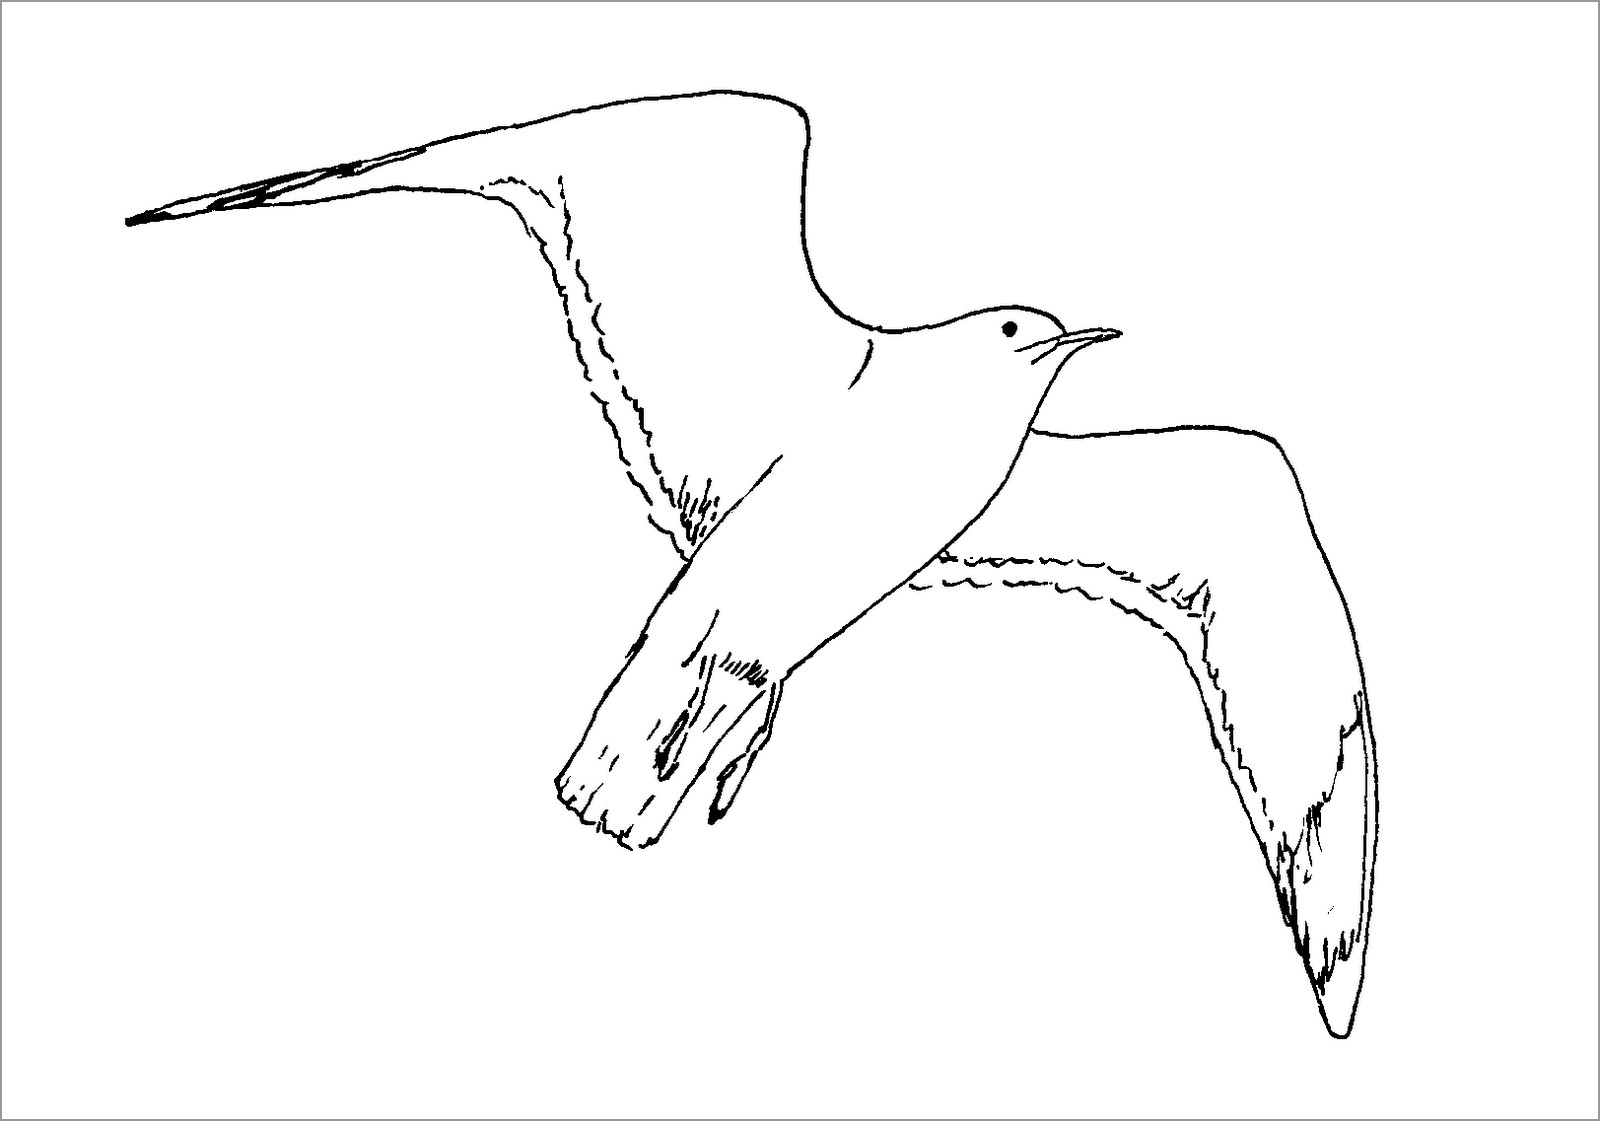 Seagulls Coloring Page for Kindergarten